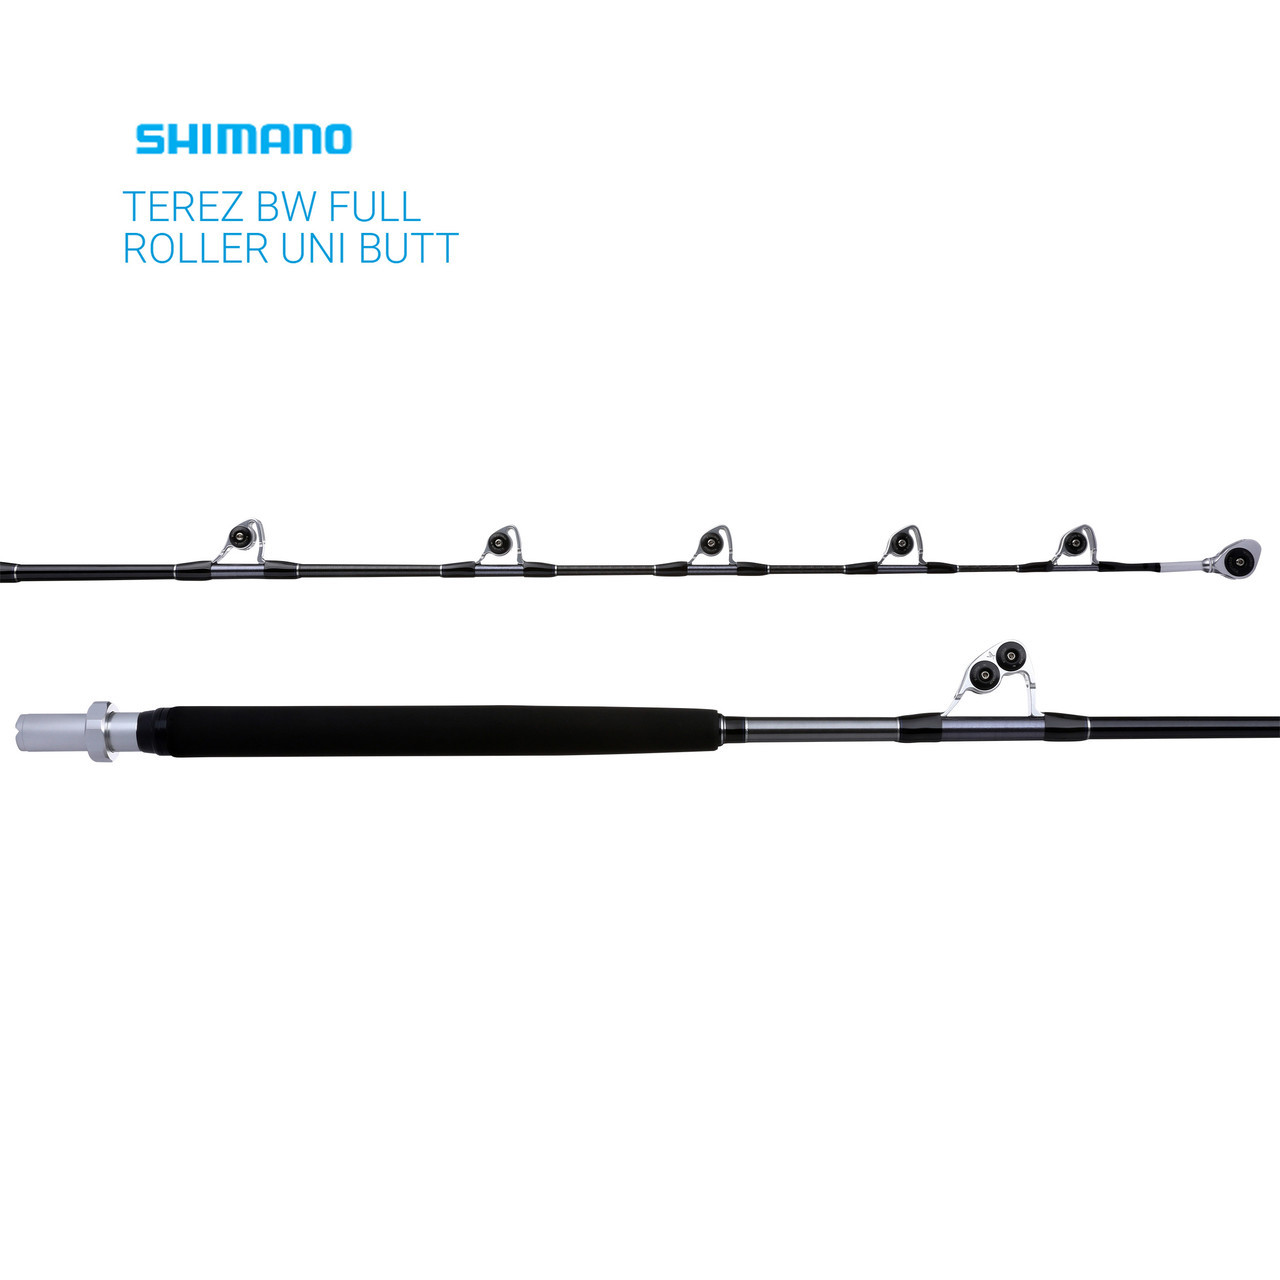 Blade jigging rods are now available for full-scale jigging in